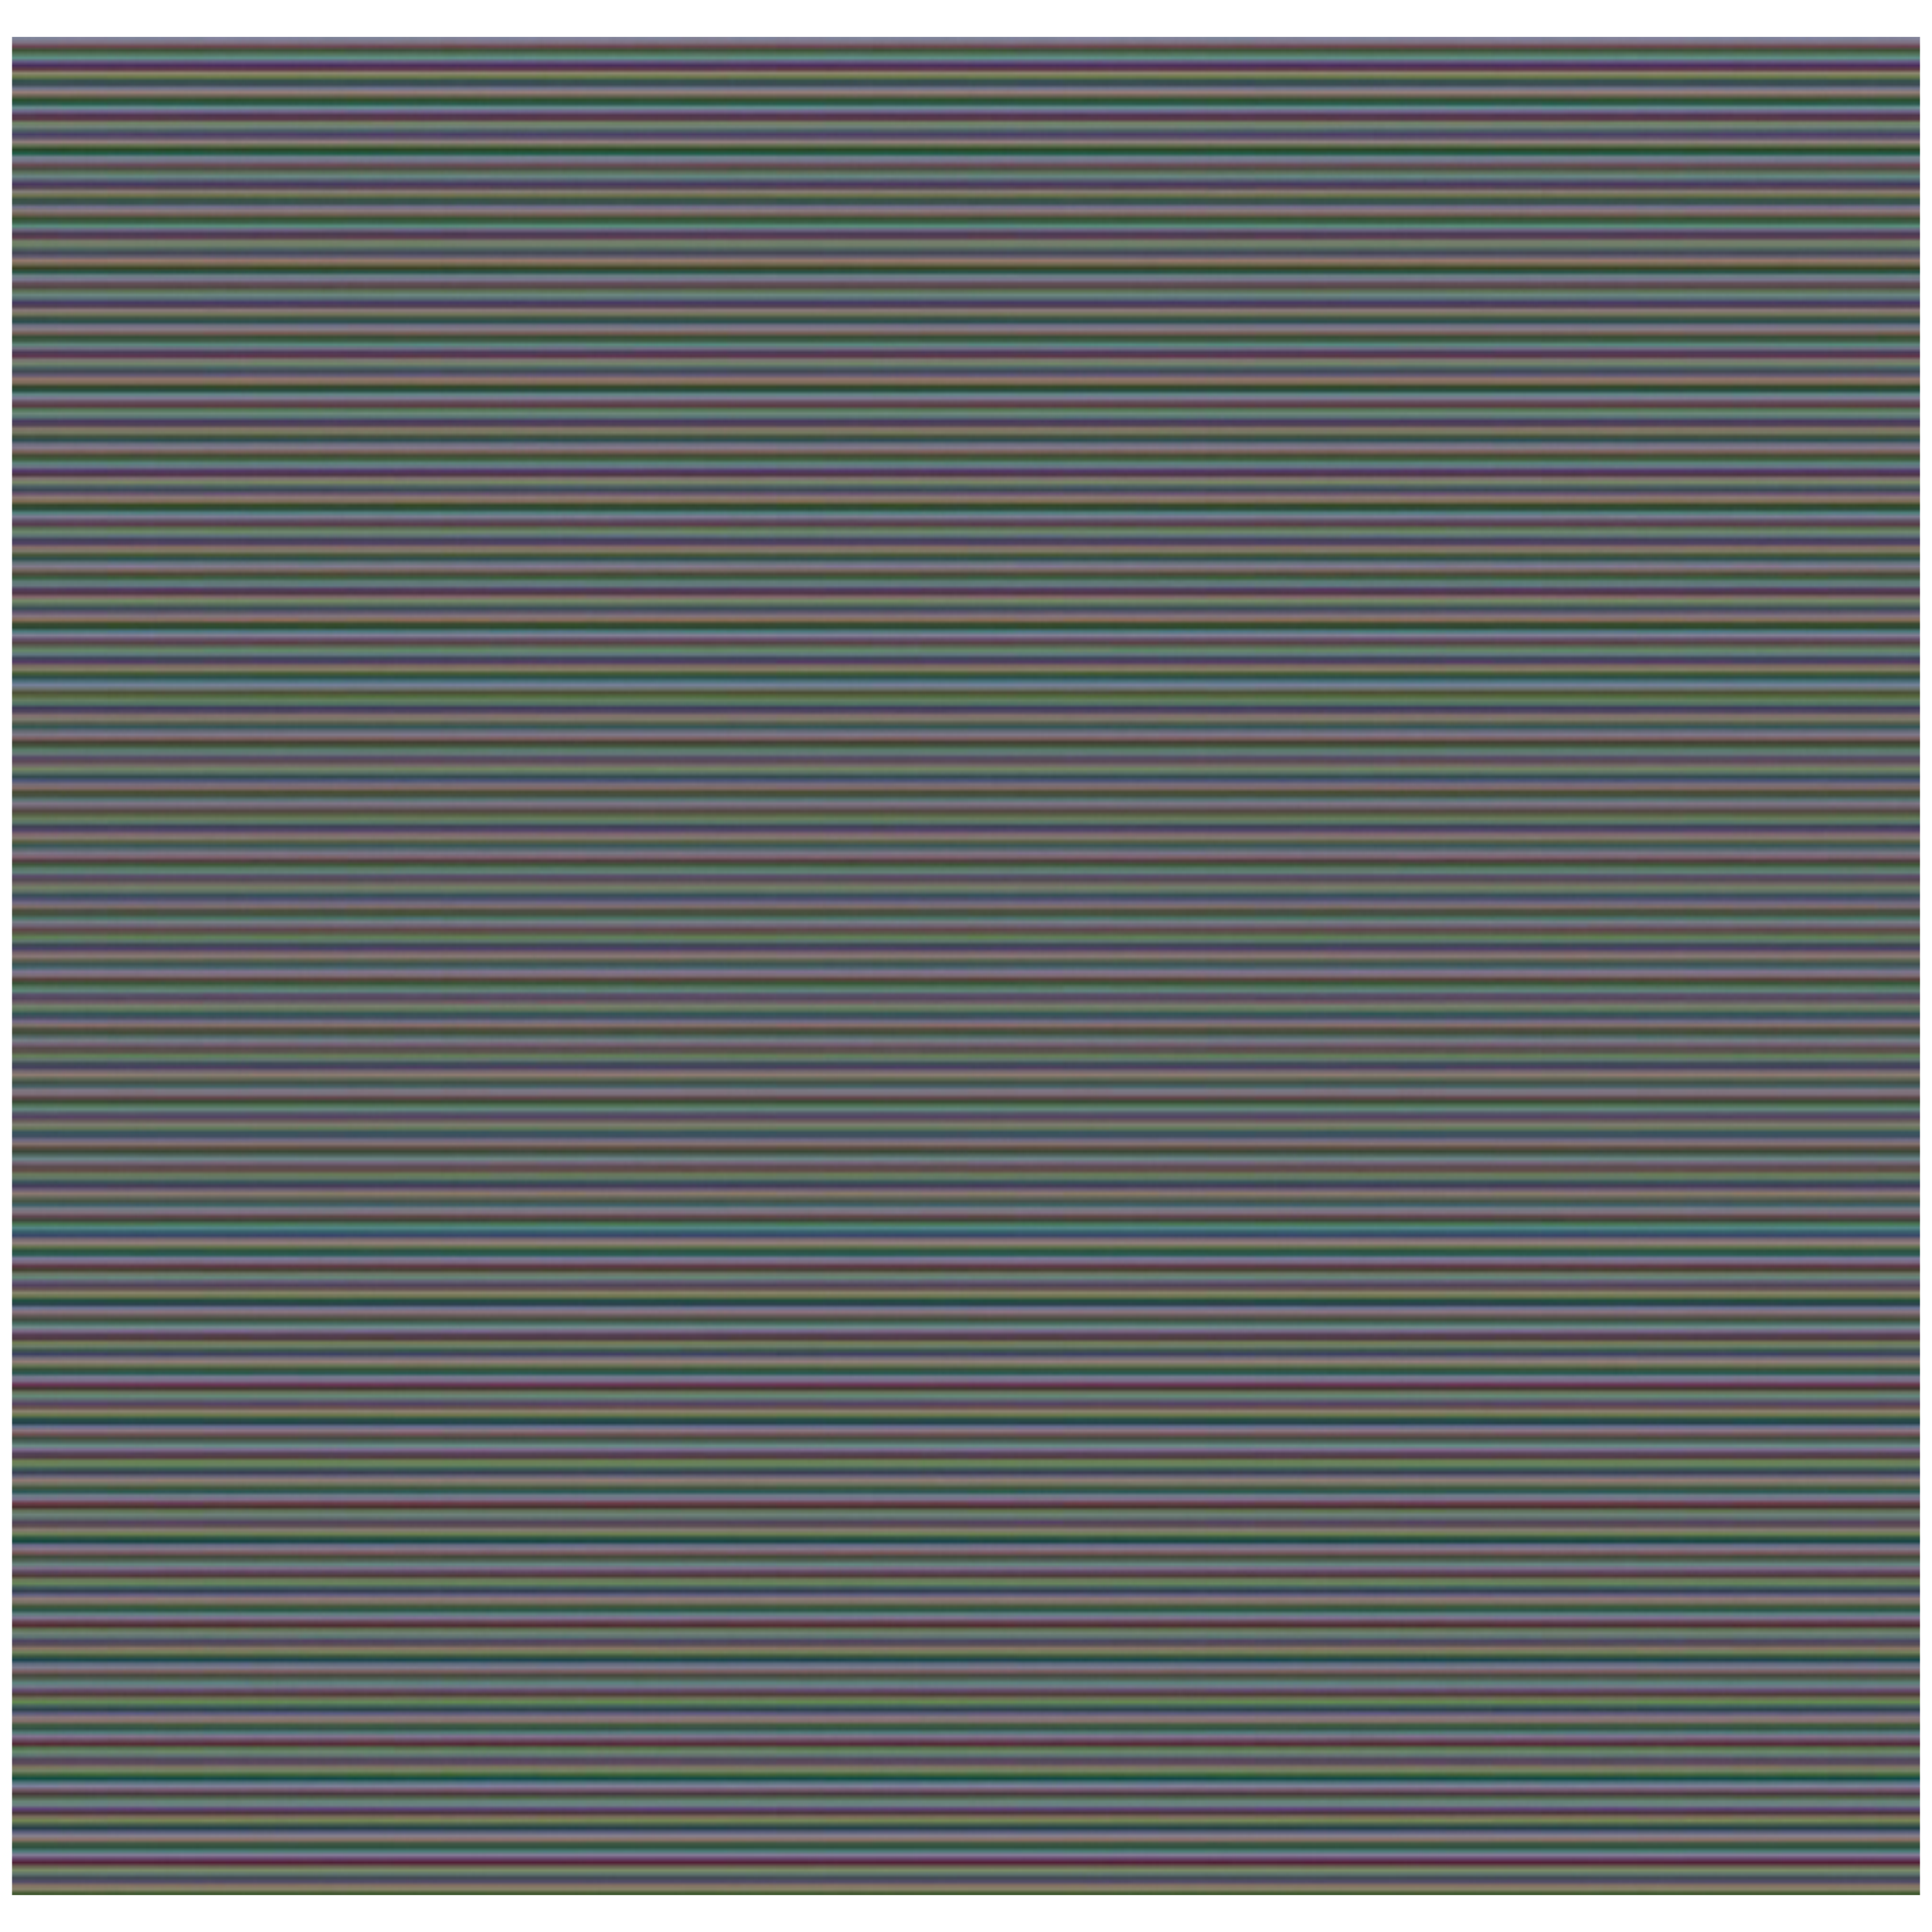 Transparent aesthetic vhs overlay png - mainreka